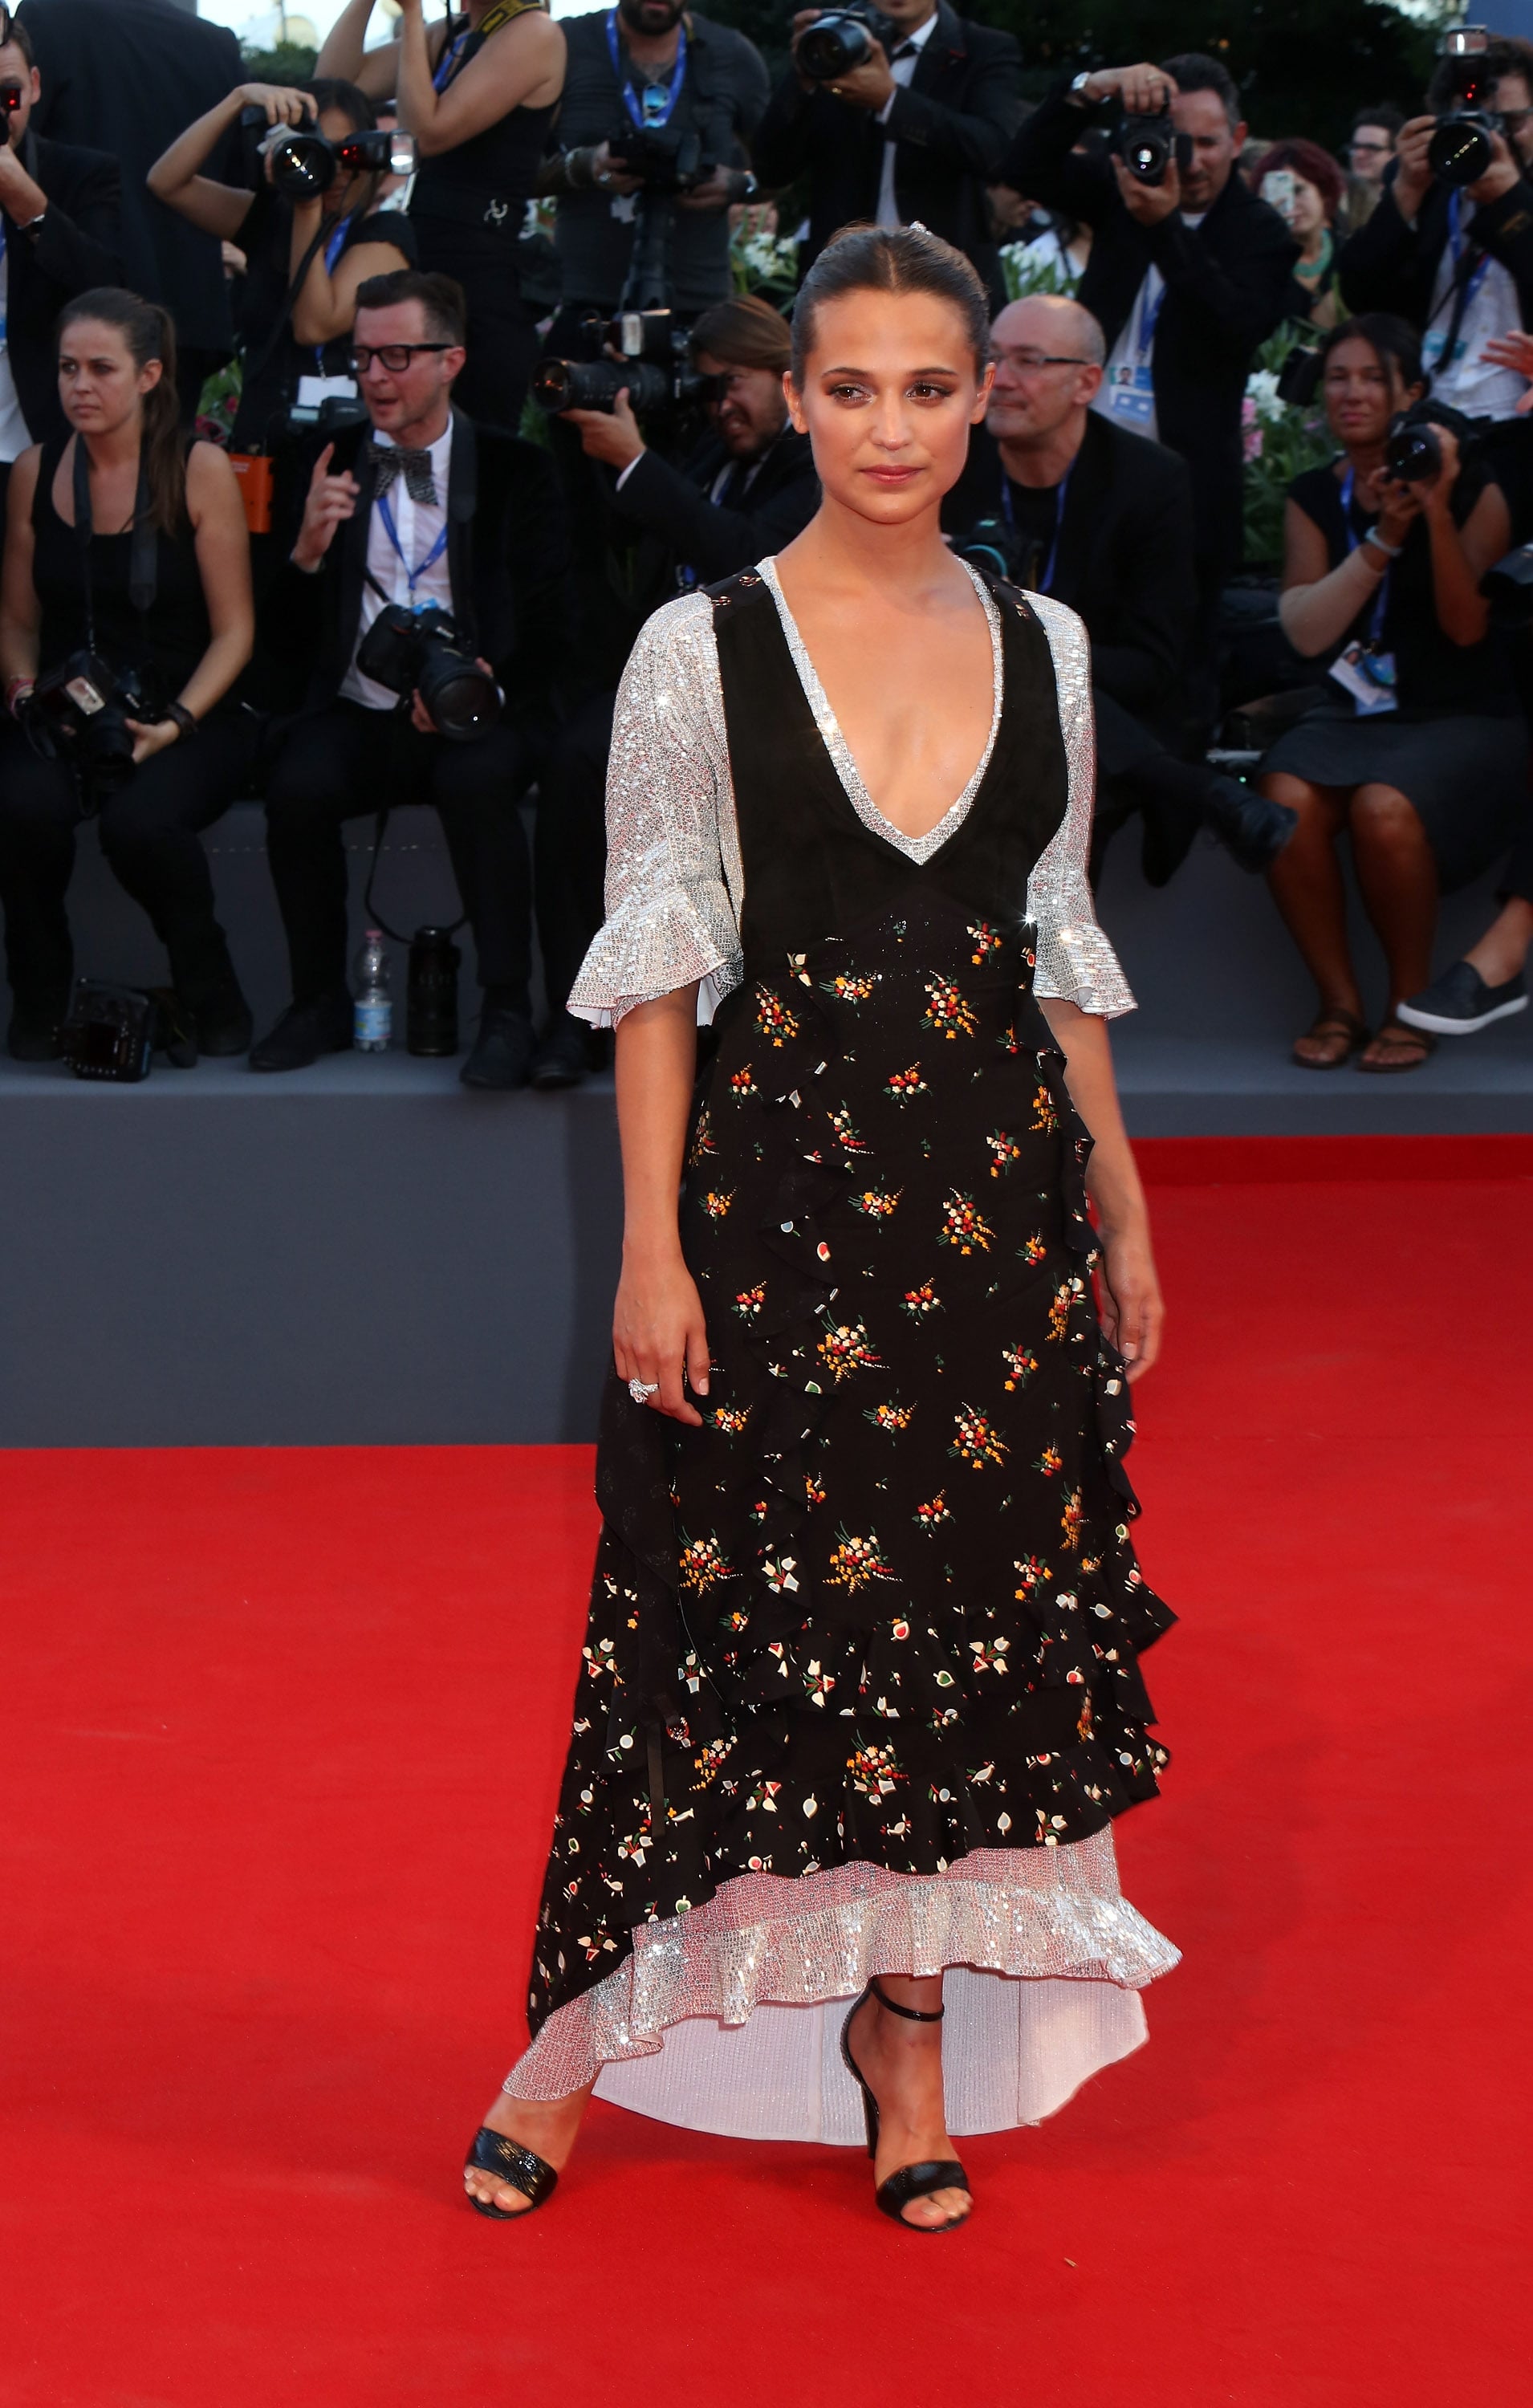 Alicia Vikander's Best Red Carpet Looks Through the Years